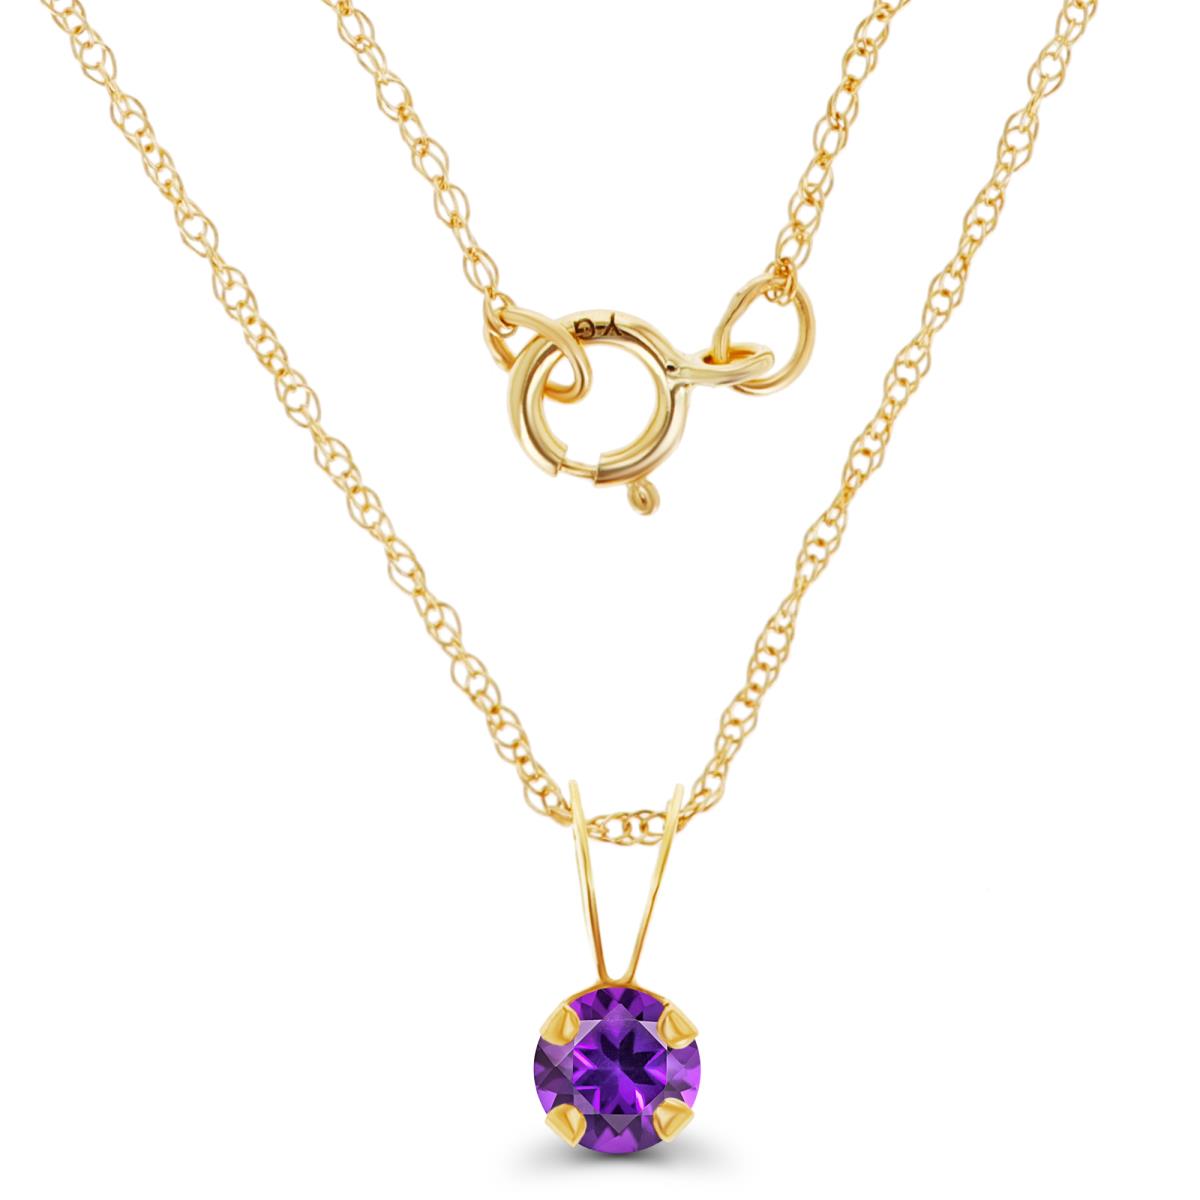 14K Yellow Gold 4mm Round Amethyst 18" Rope Chain Necklace